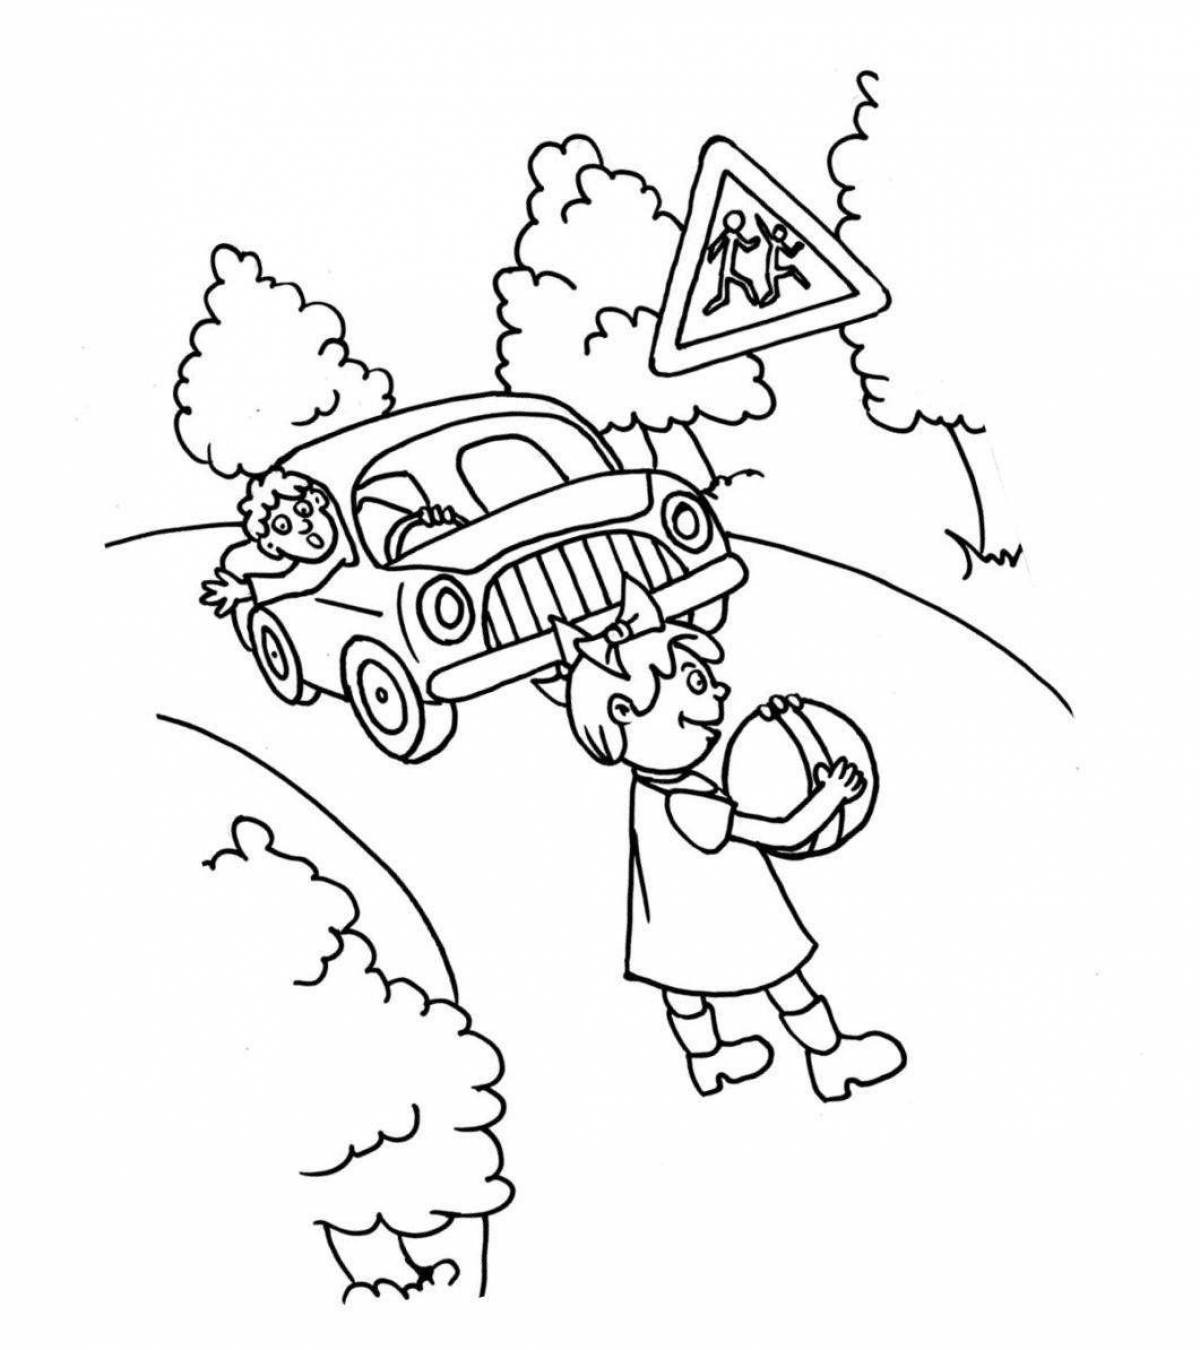 Funny traffic safety coloring page